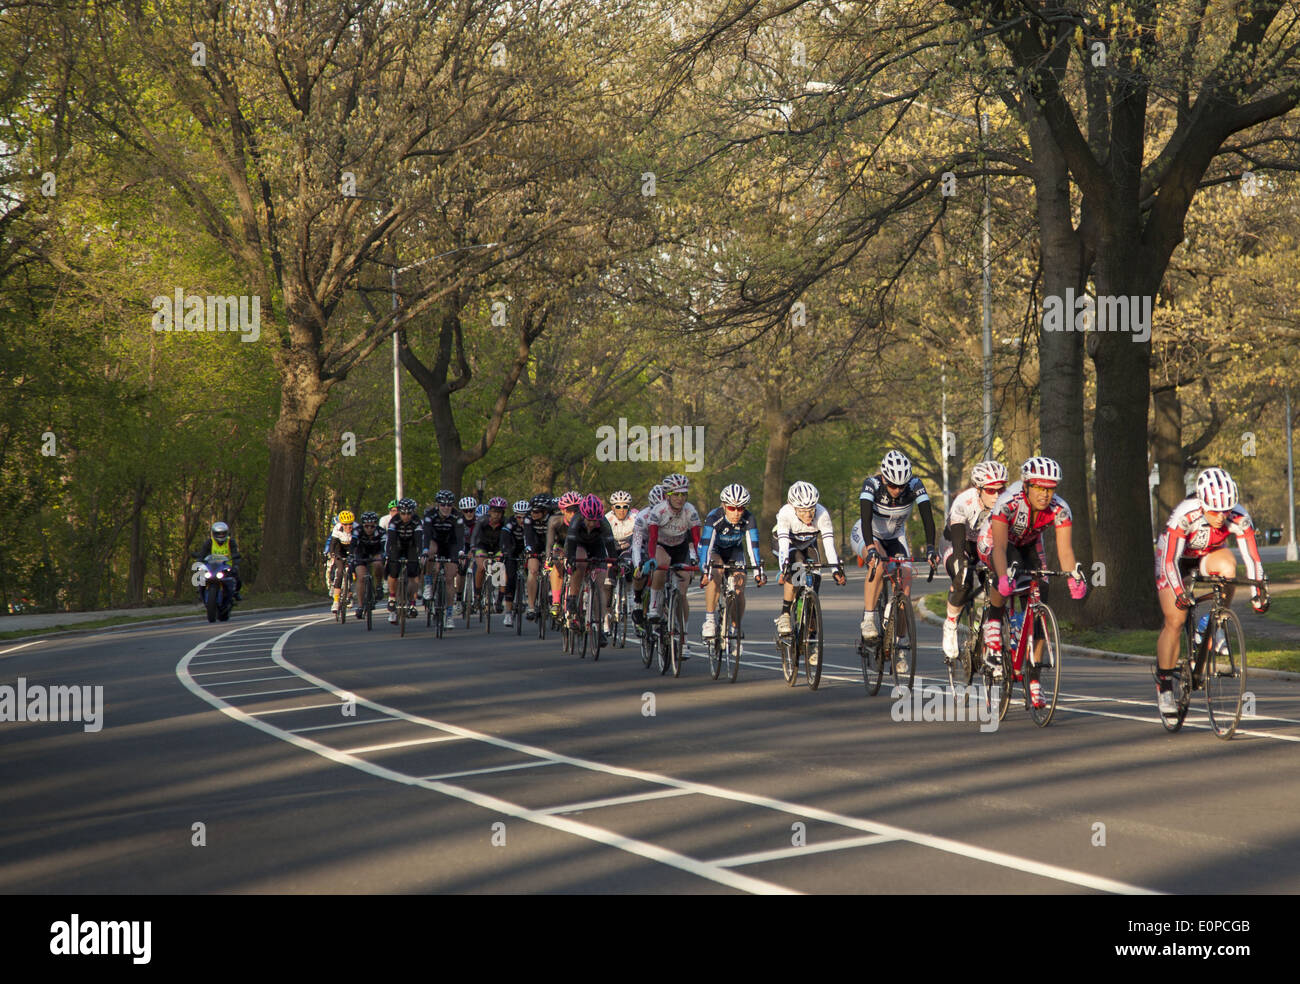 Bicycle races are regular early morning events in Prospect Park in Brooklyn, NY. Stock Photo